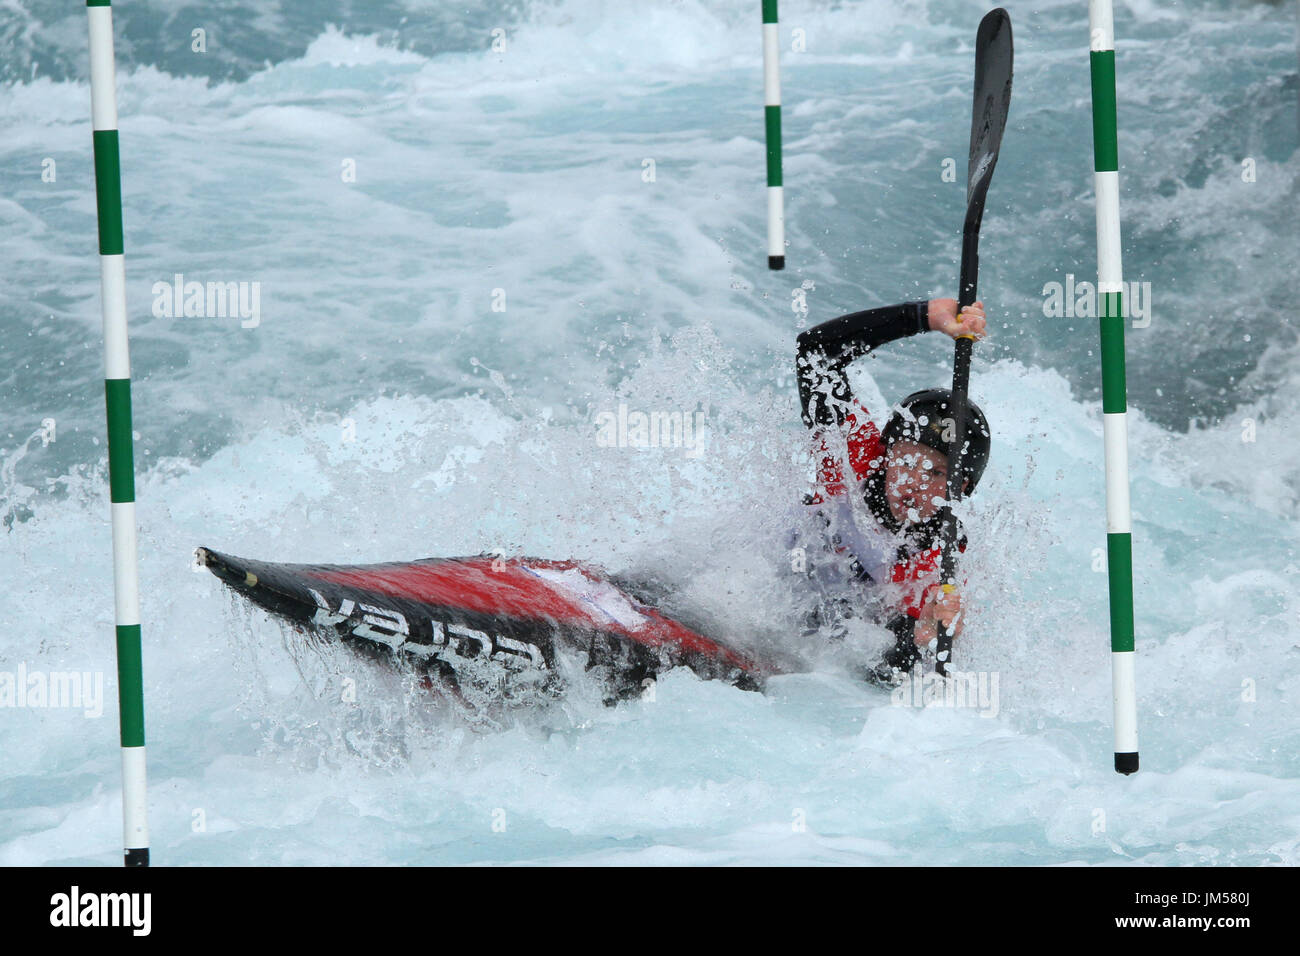 Zak Prince competes at Lee Valley White Water Centre during British selection for the team GB for European and World championships. Stock Photo